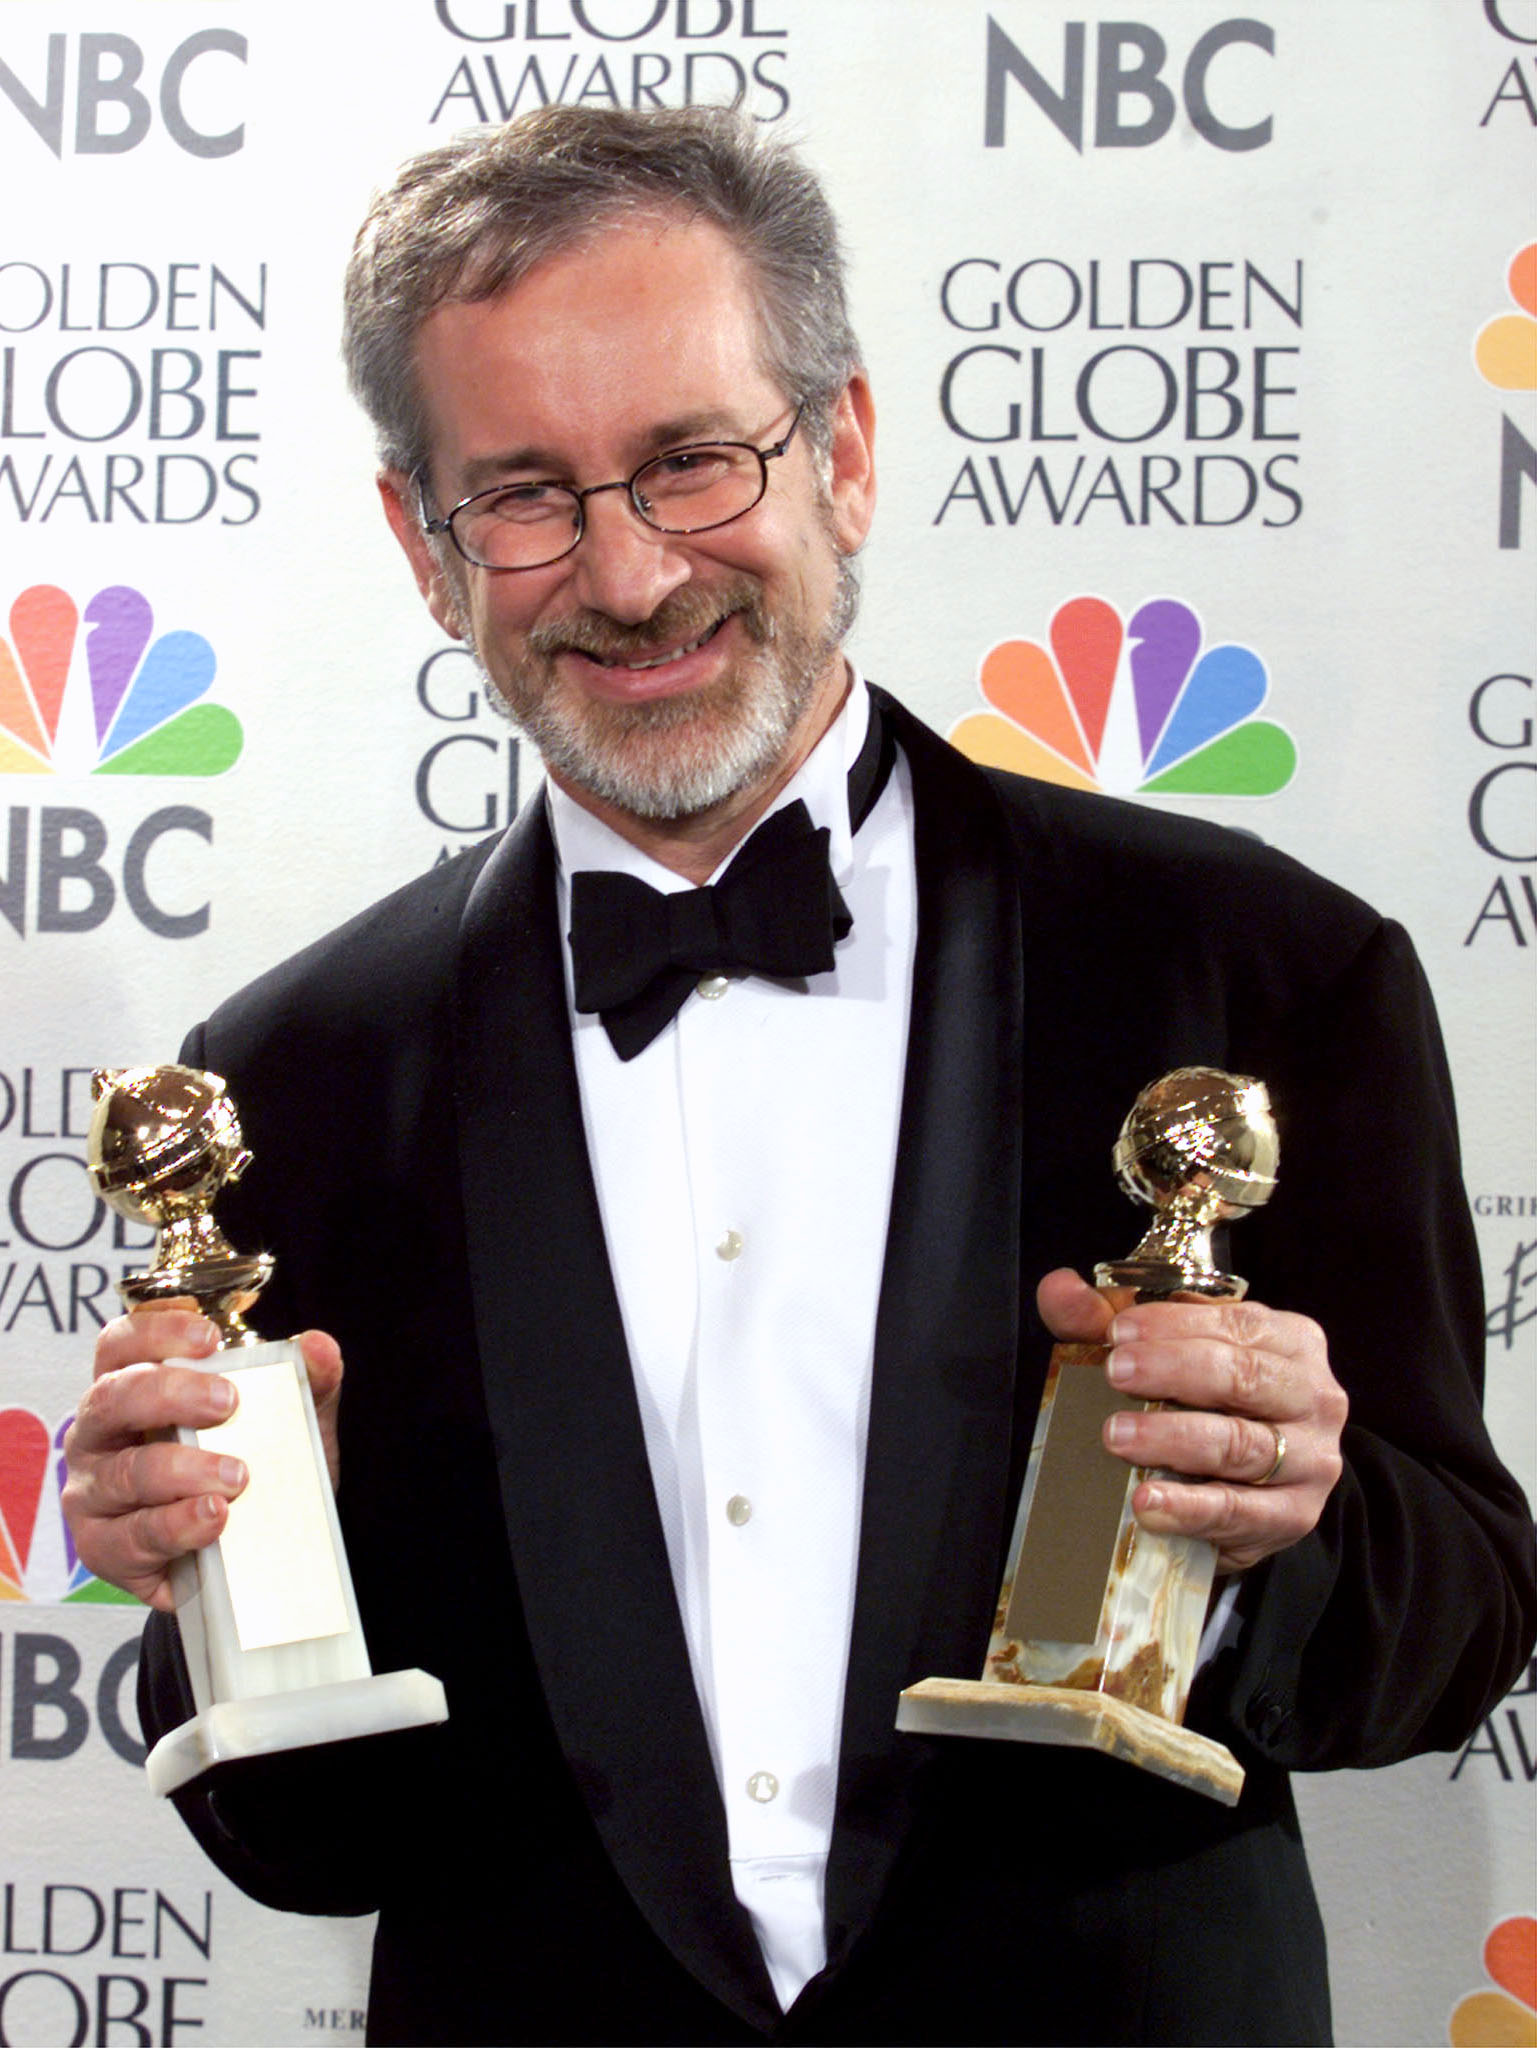 FILE PHOTO 24JAN99 - Oscar-winning director Steven Spielberg had one of his kidneys removed after doctors found an "irregularity" on the organ, his spokesman said on Monday. Spielberg, shown with his Golden Globe awards January 24, 1999, was back at home recuperating following the surgery, the filmmaker's spokesman, Marvin Levy, said. HB/